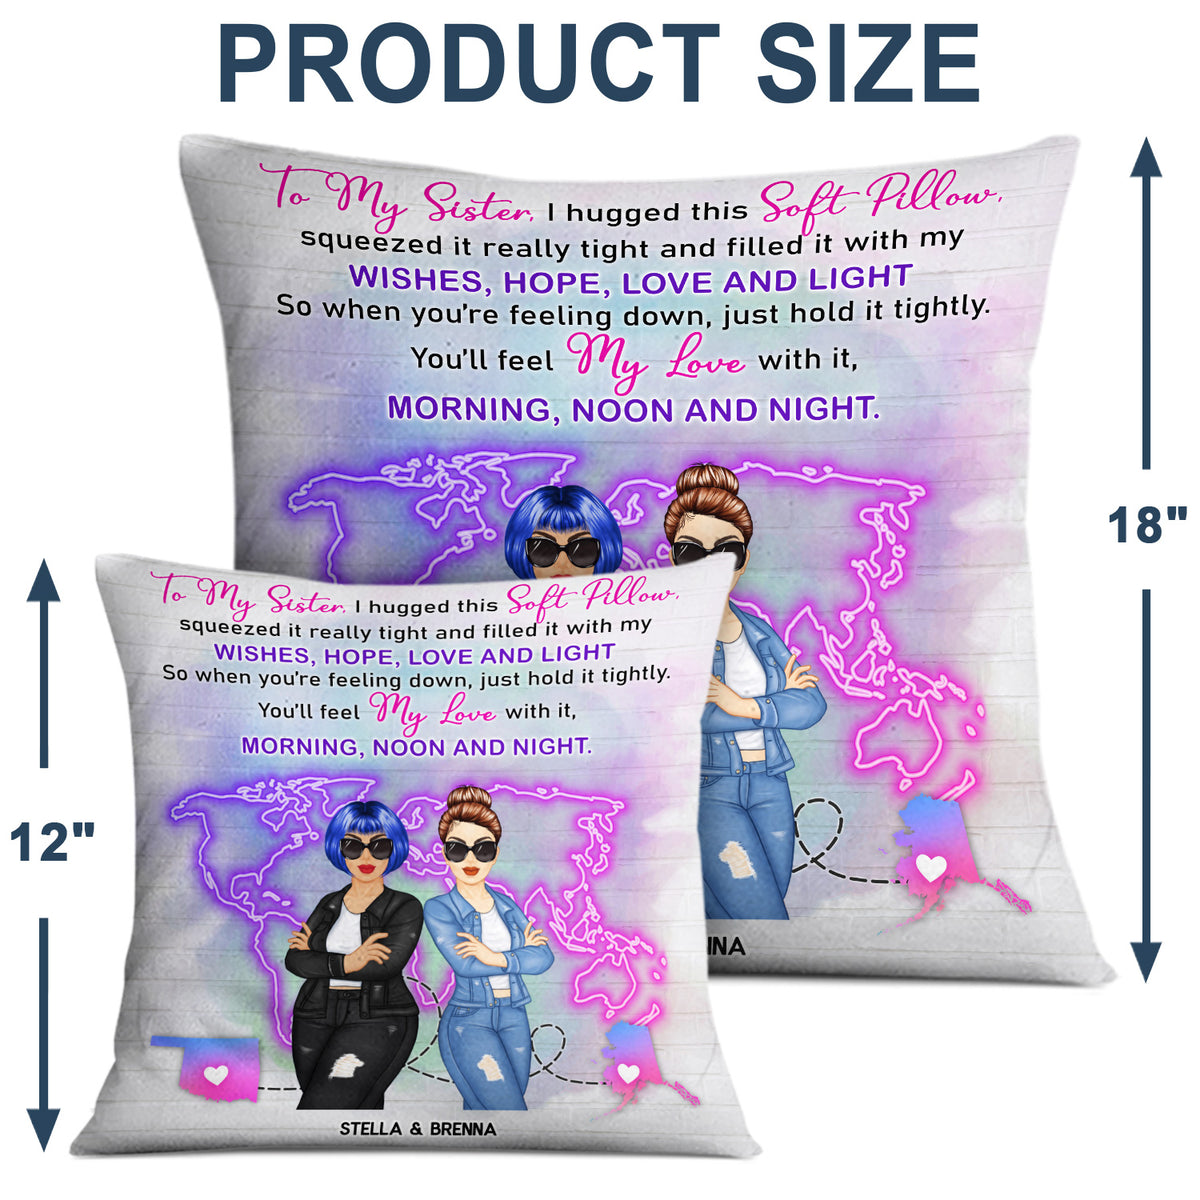 Hug This Soft Pillow - Gift For Long Distance Sisters Besties